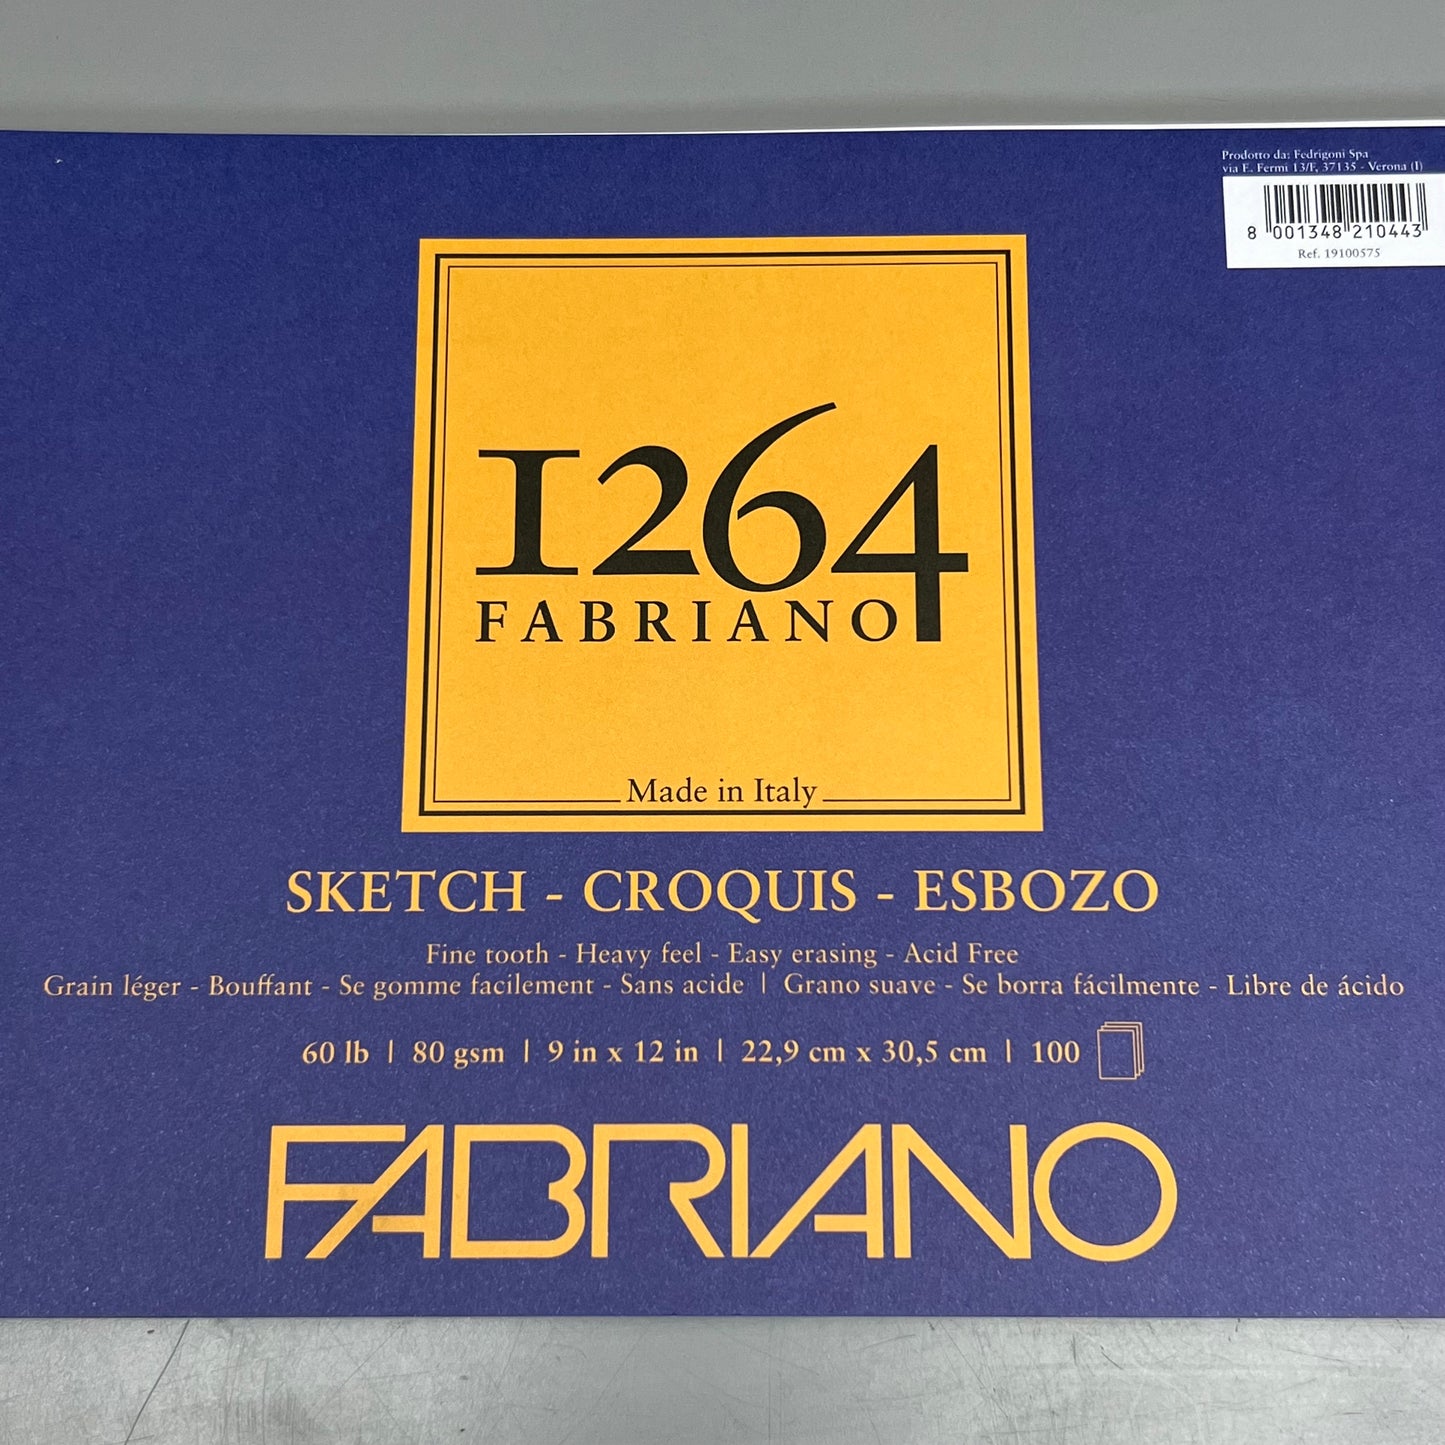 FABRIANO 5PK of I264 Sketch Paper 9in x 12in - 100 Sheets 500 Total White